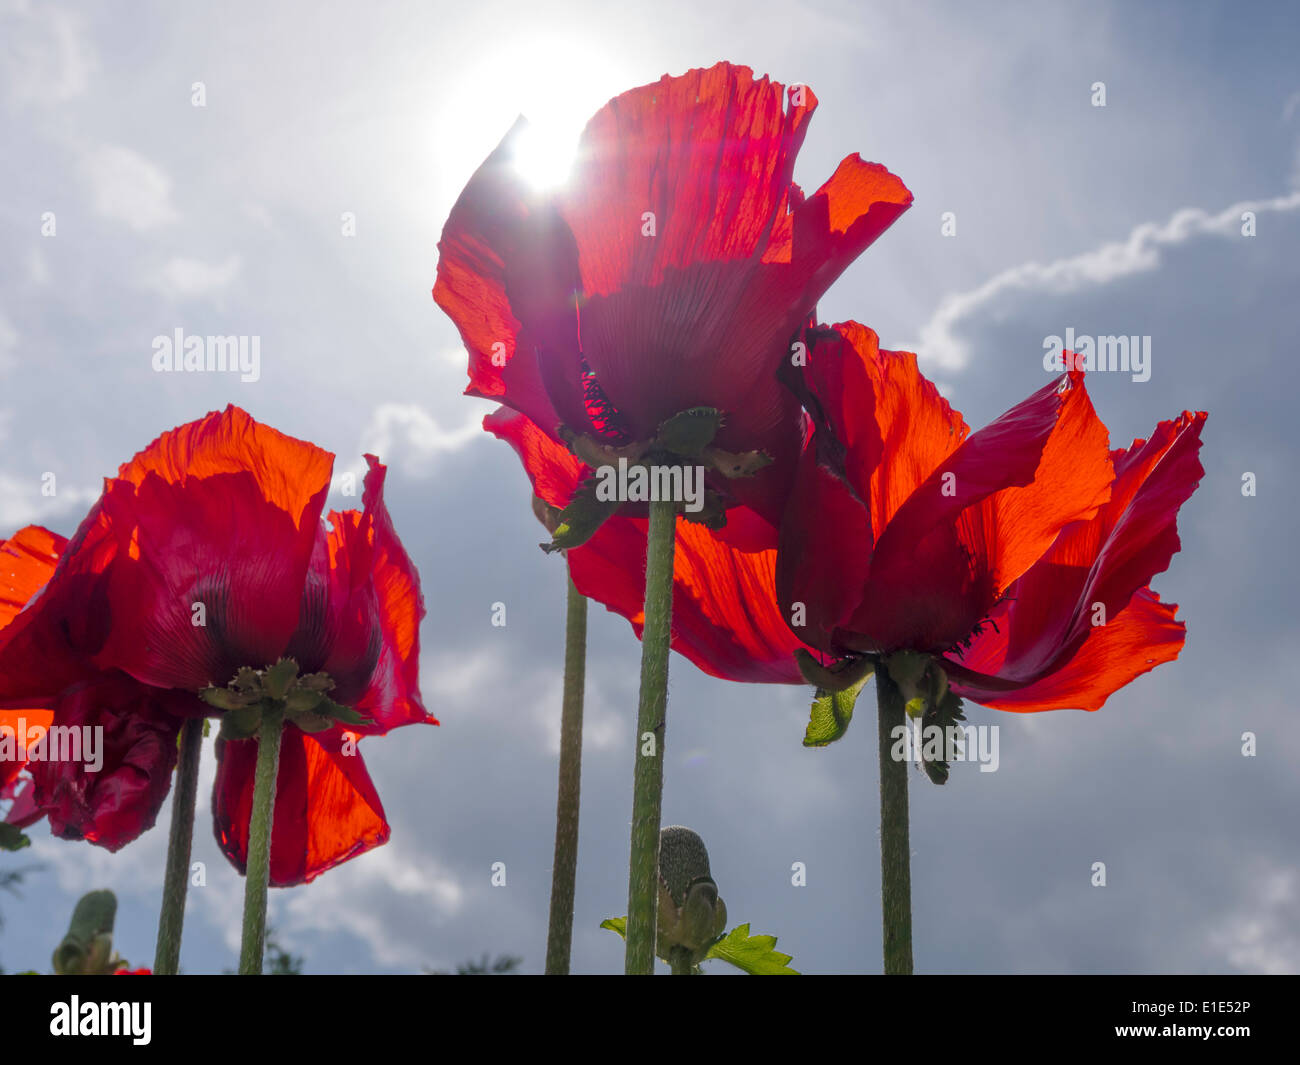 Bright red poppies garden plants back lit by summer sun Stock Photo